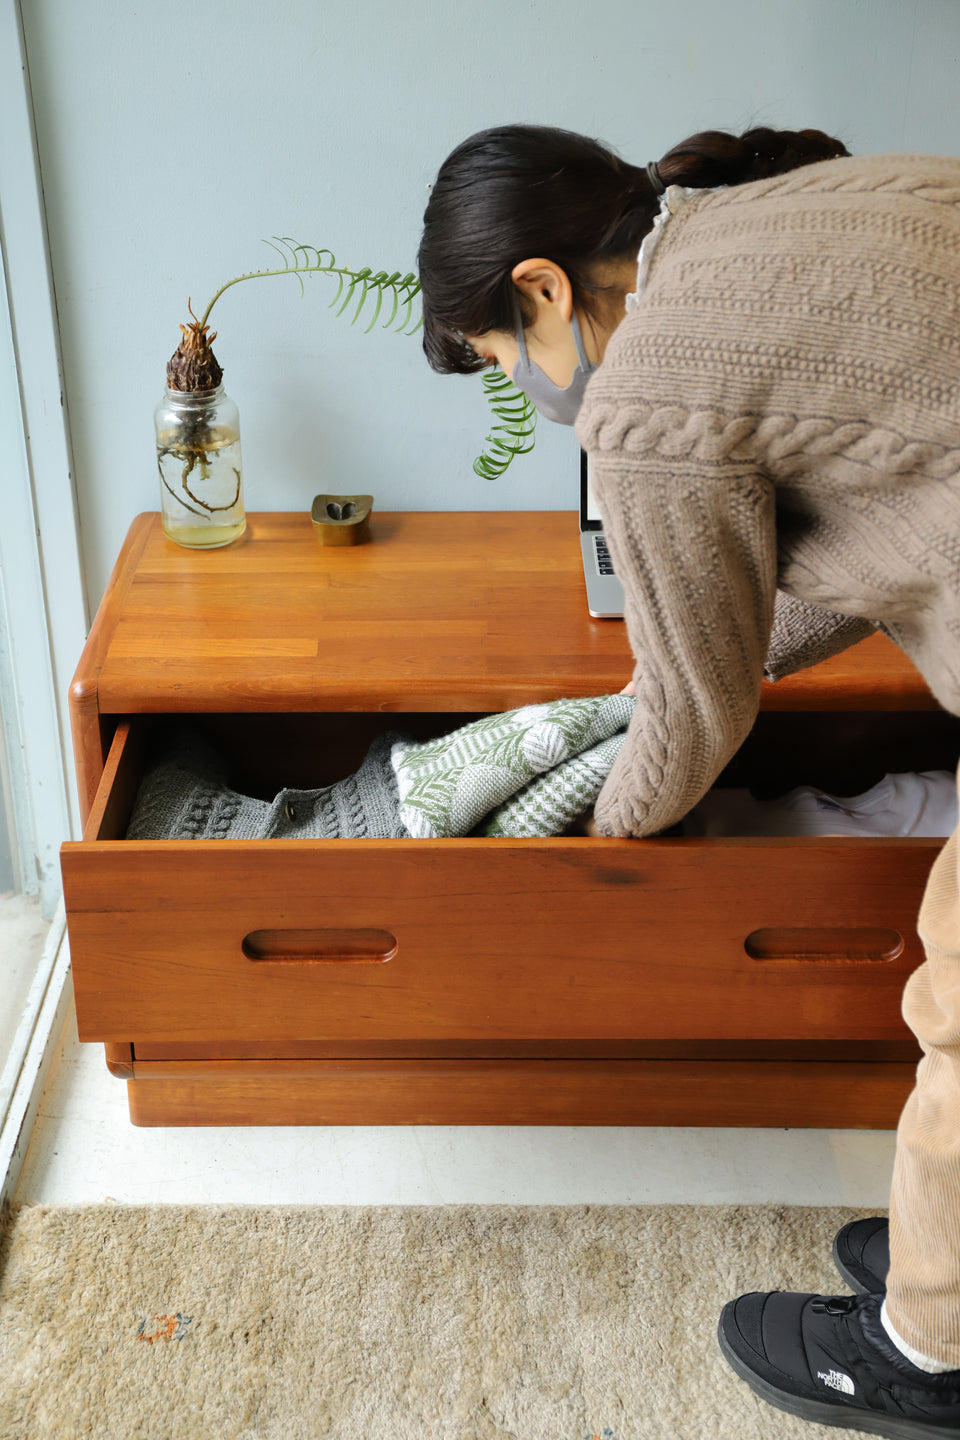 Vintage Teakwood 2drawer Low Chest/ヴィンテージ ローチェスト チーク材 収納家具 北欧デザイン